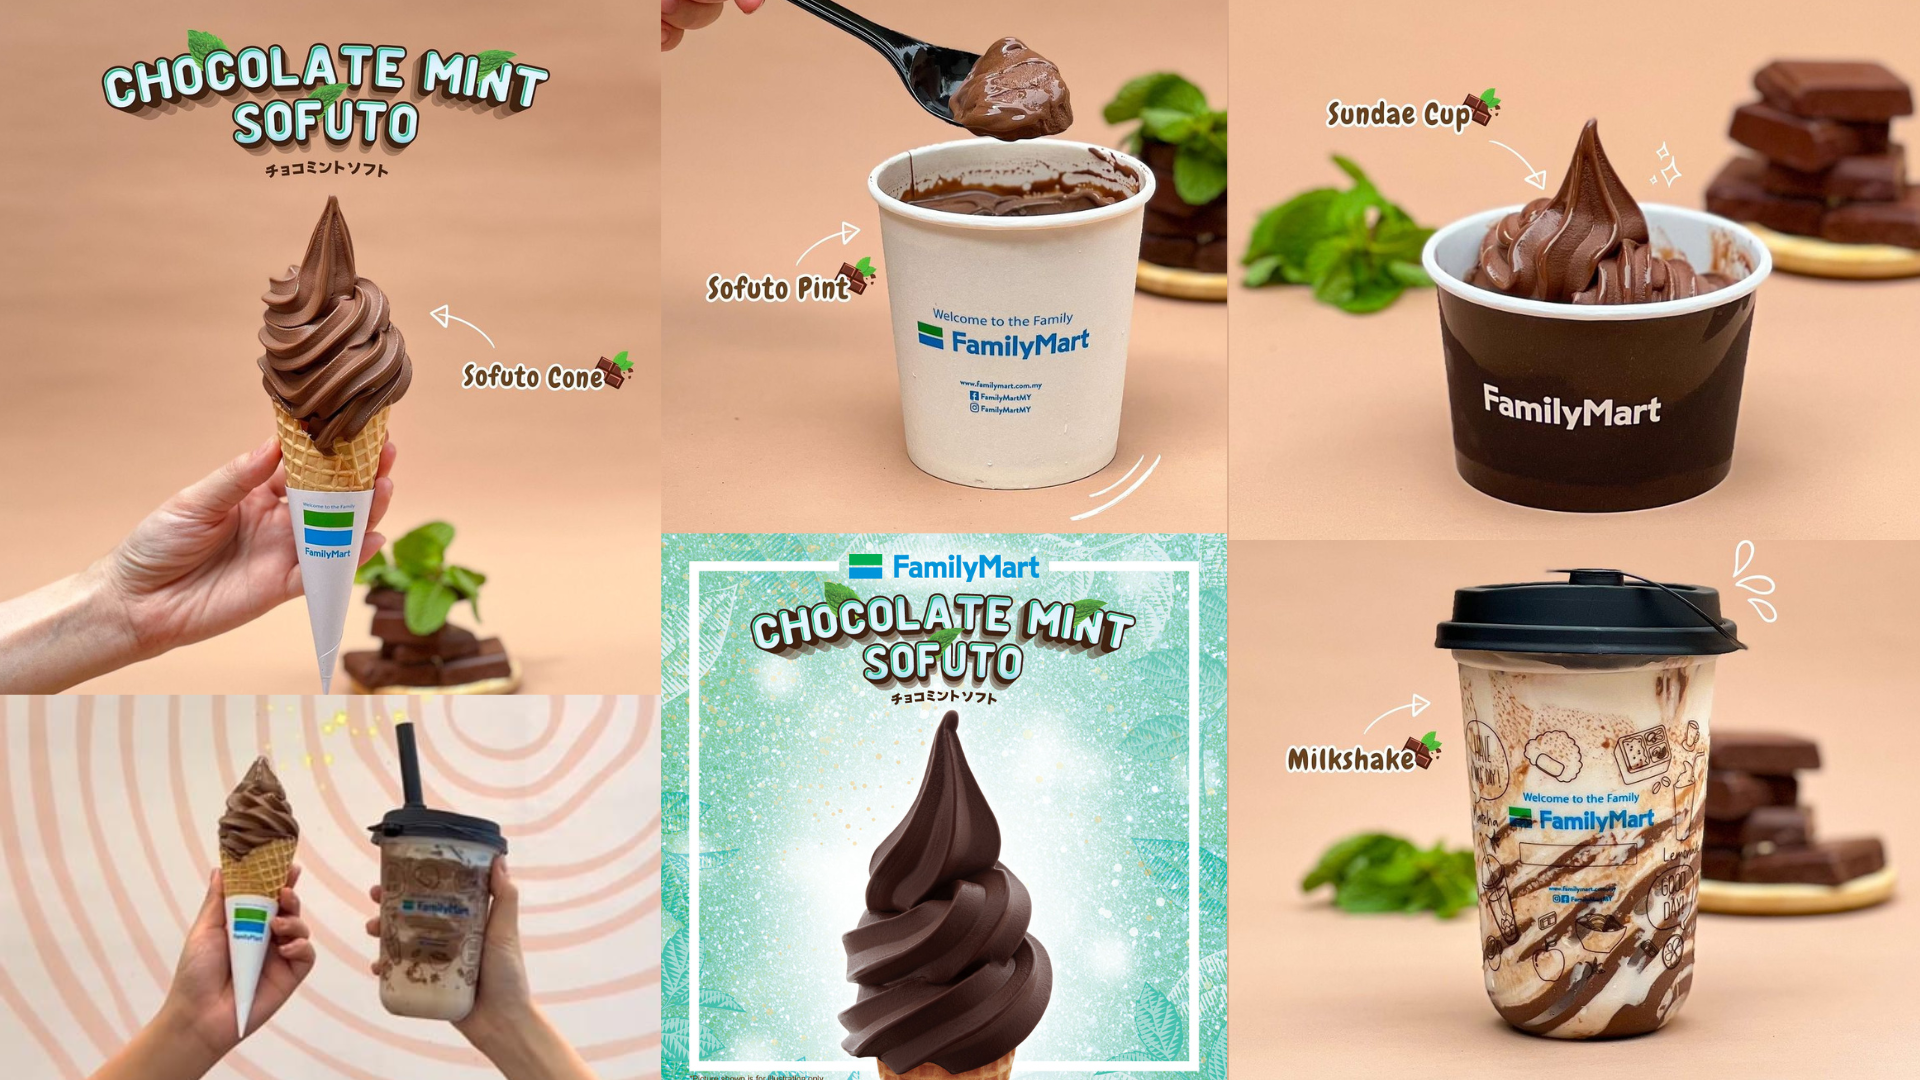 Rich chocolate and cool, refreshing mint combine flawlessly to create a taste-bud-melting fusion! 🍫❄️